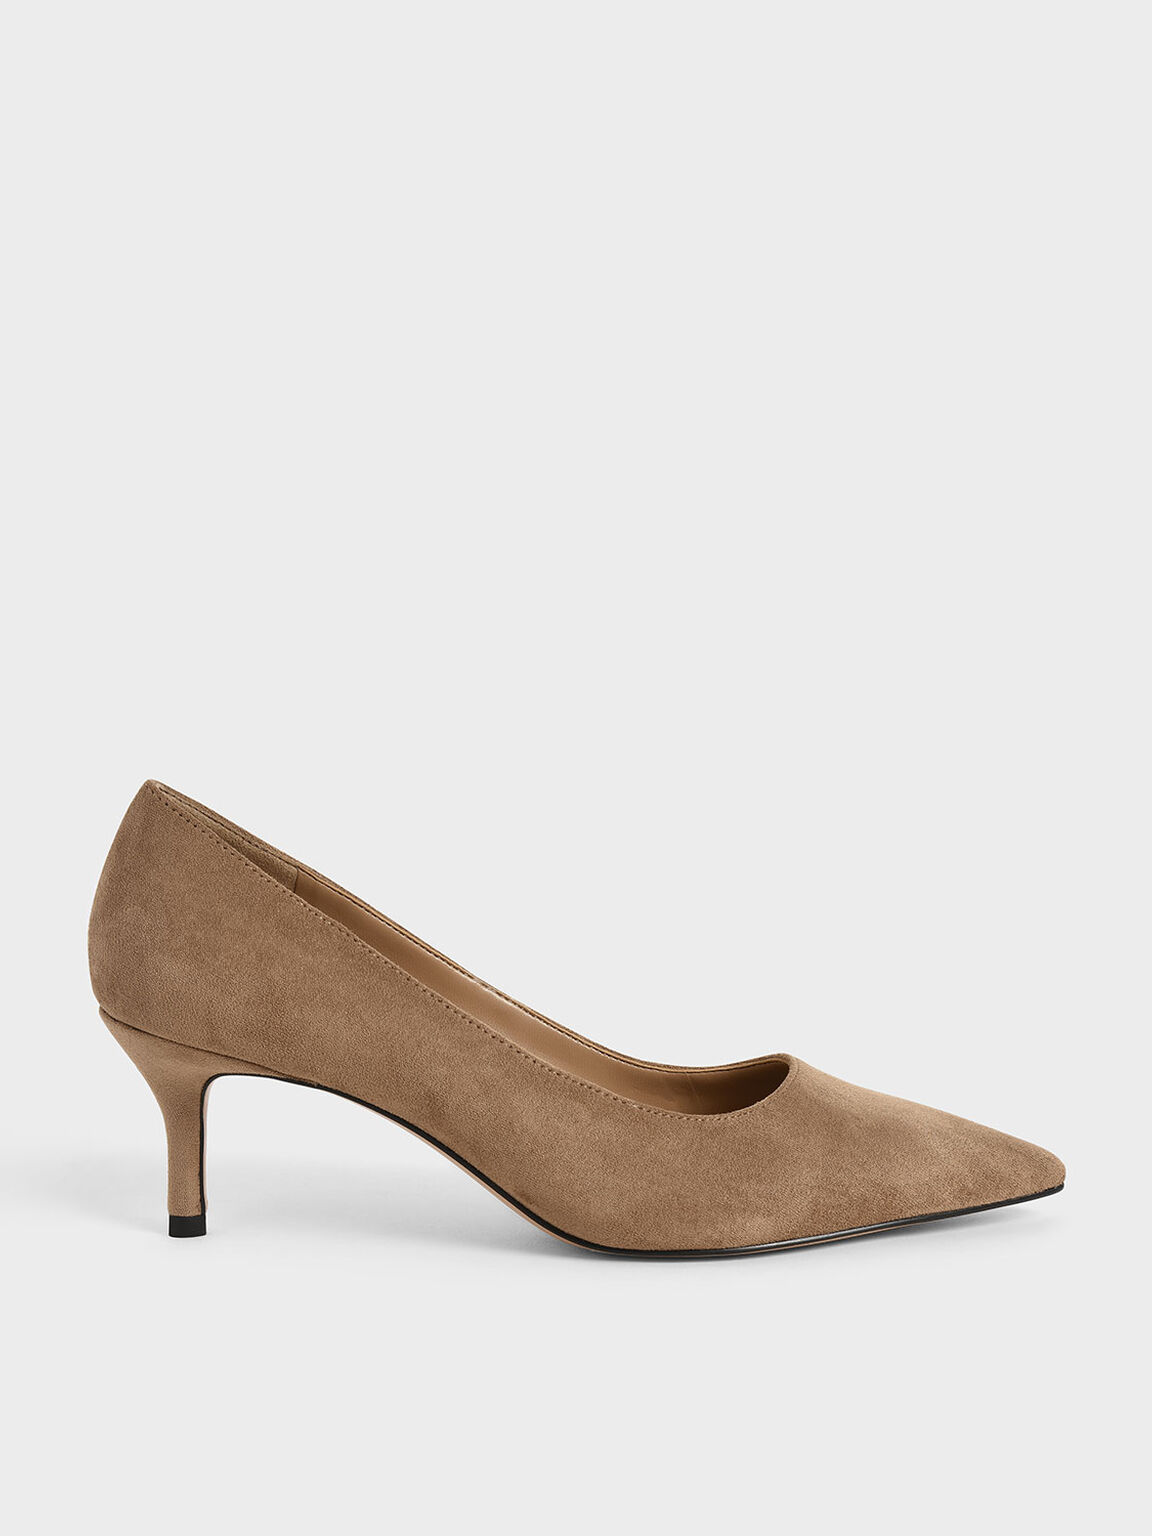 Textured Pointed Toe Court Shoes, Camel, hi-res